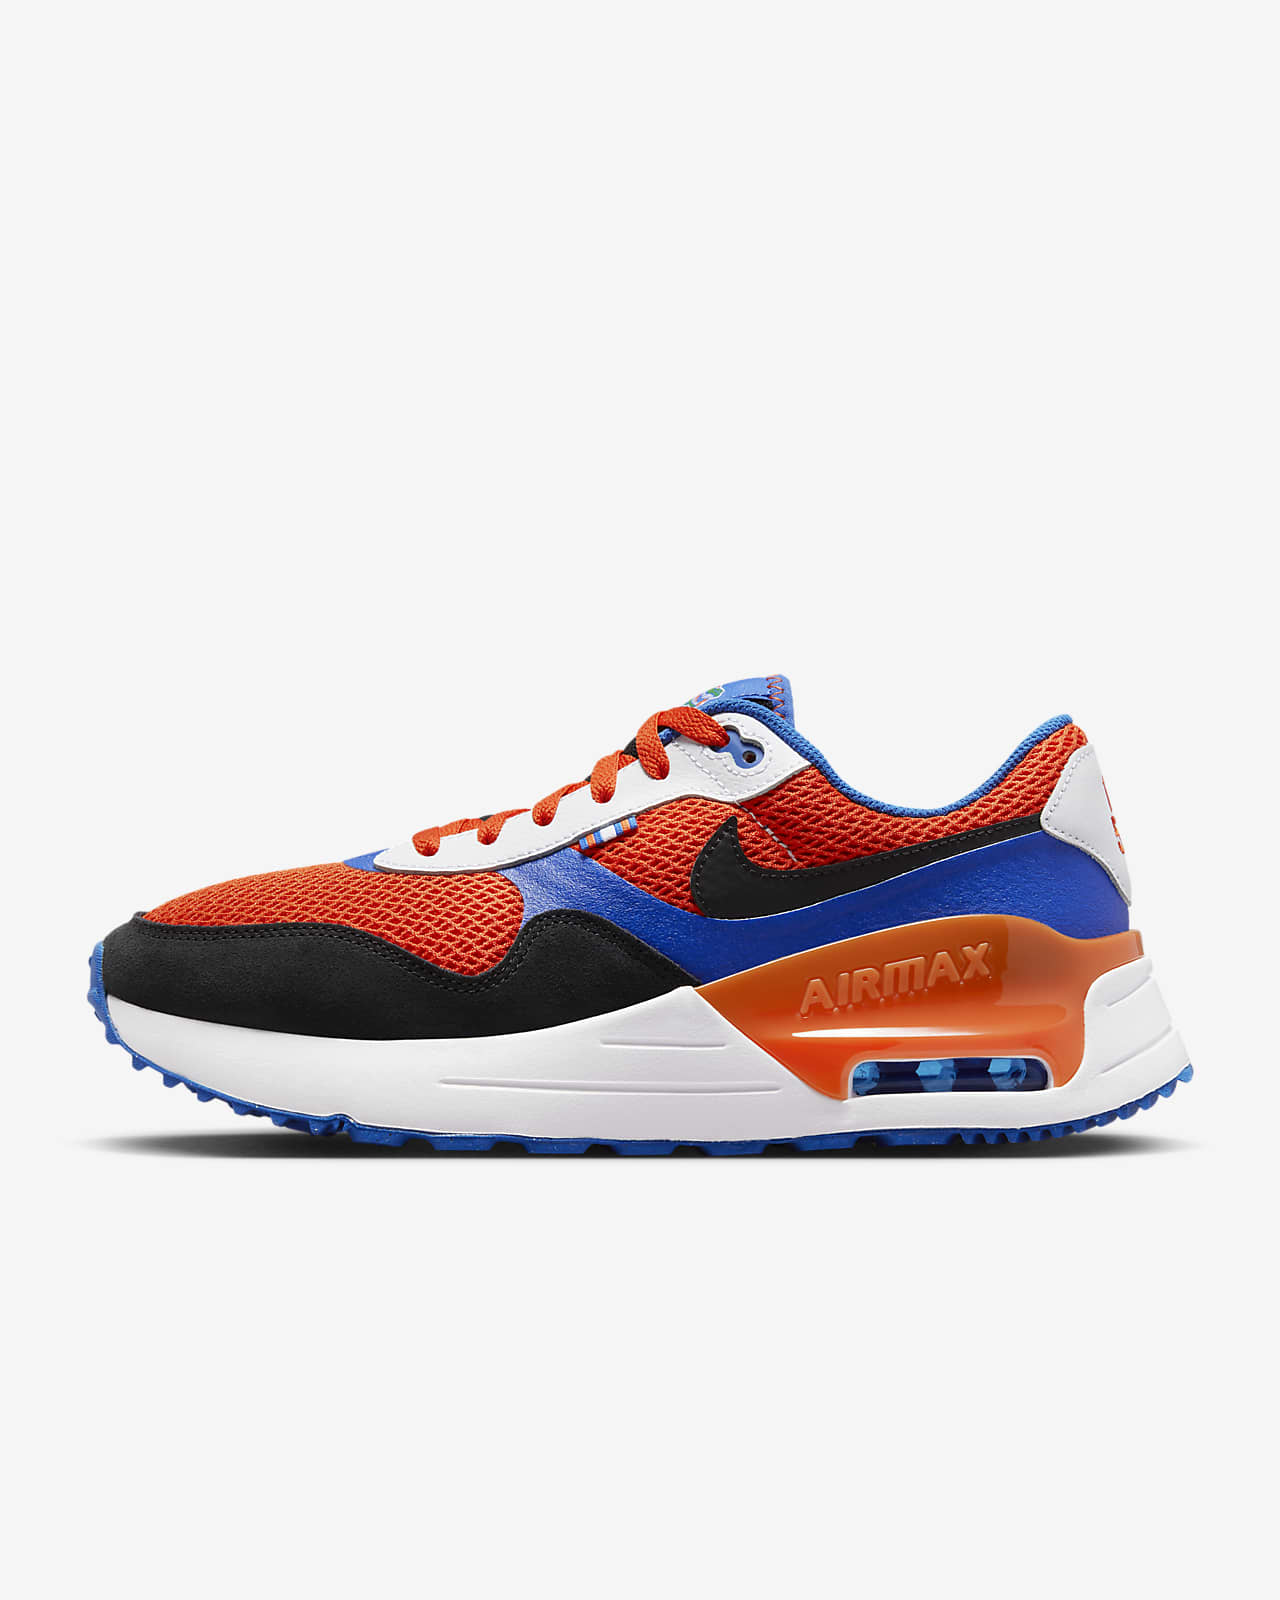 Nike College Air Max SYSTM (Florida) Mens Shoes Review